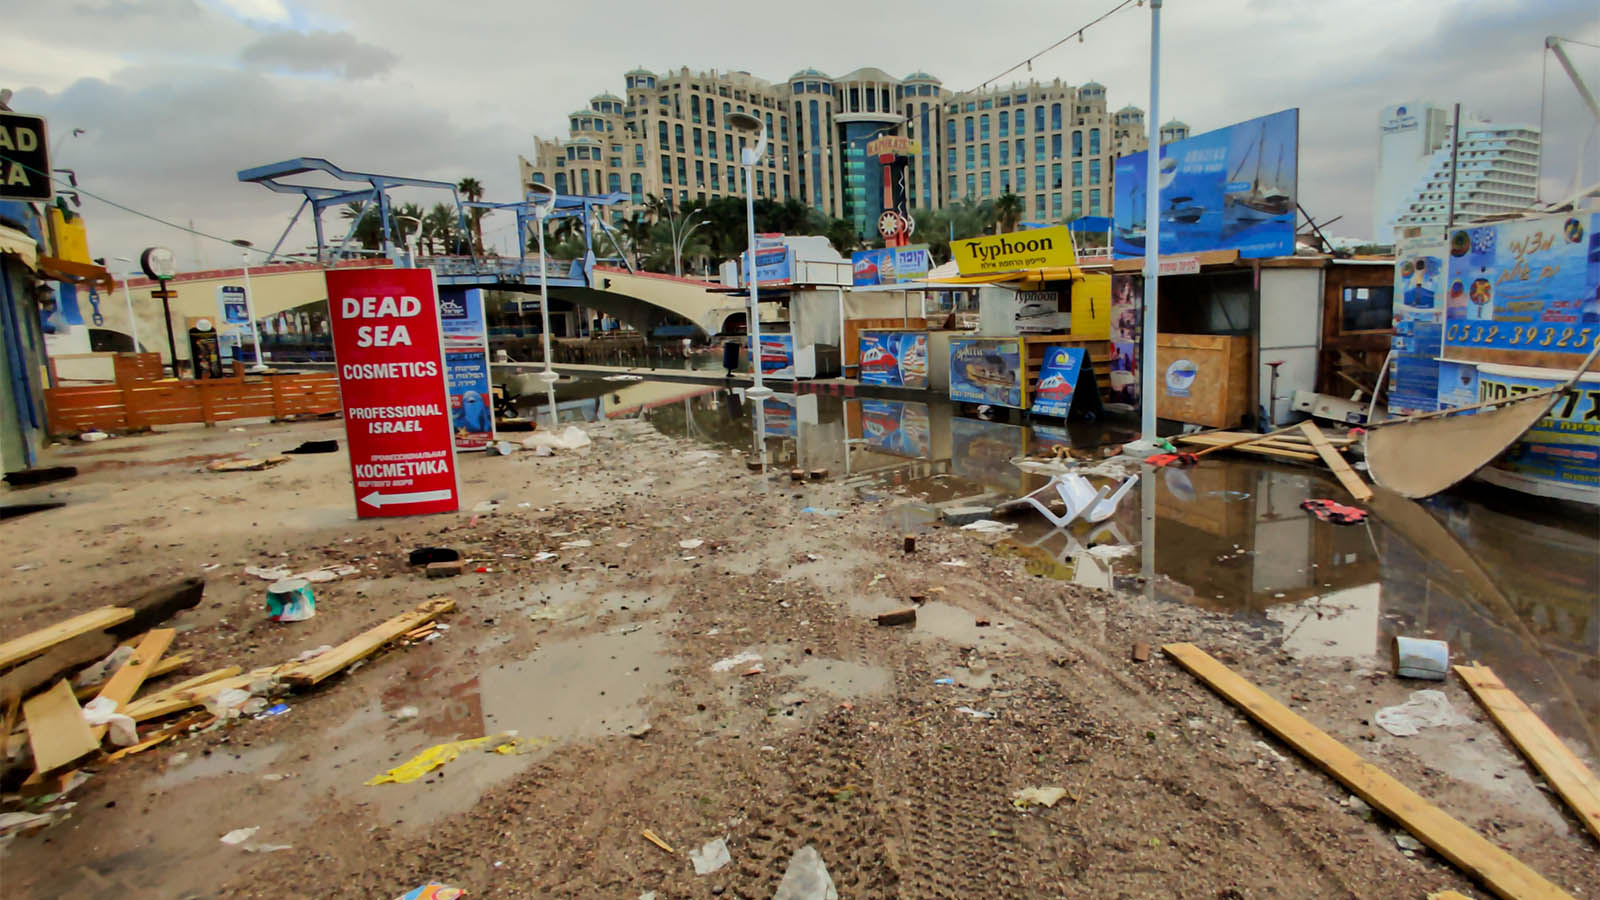 Eilat after the winter storm that wrecked havoc on its beaches, March 14, 2020 (Photograph: Flash 90)